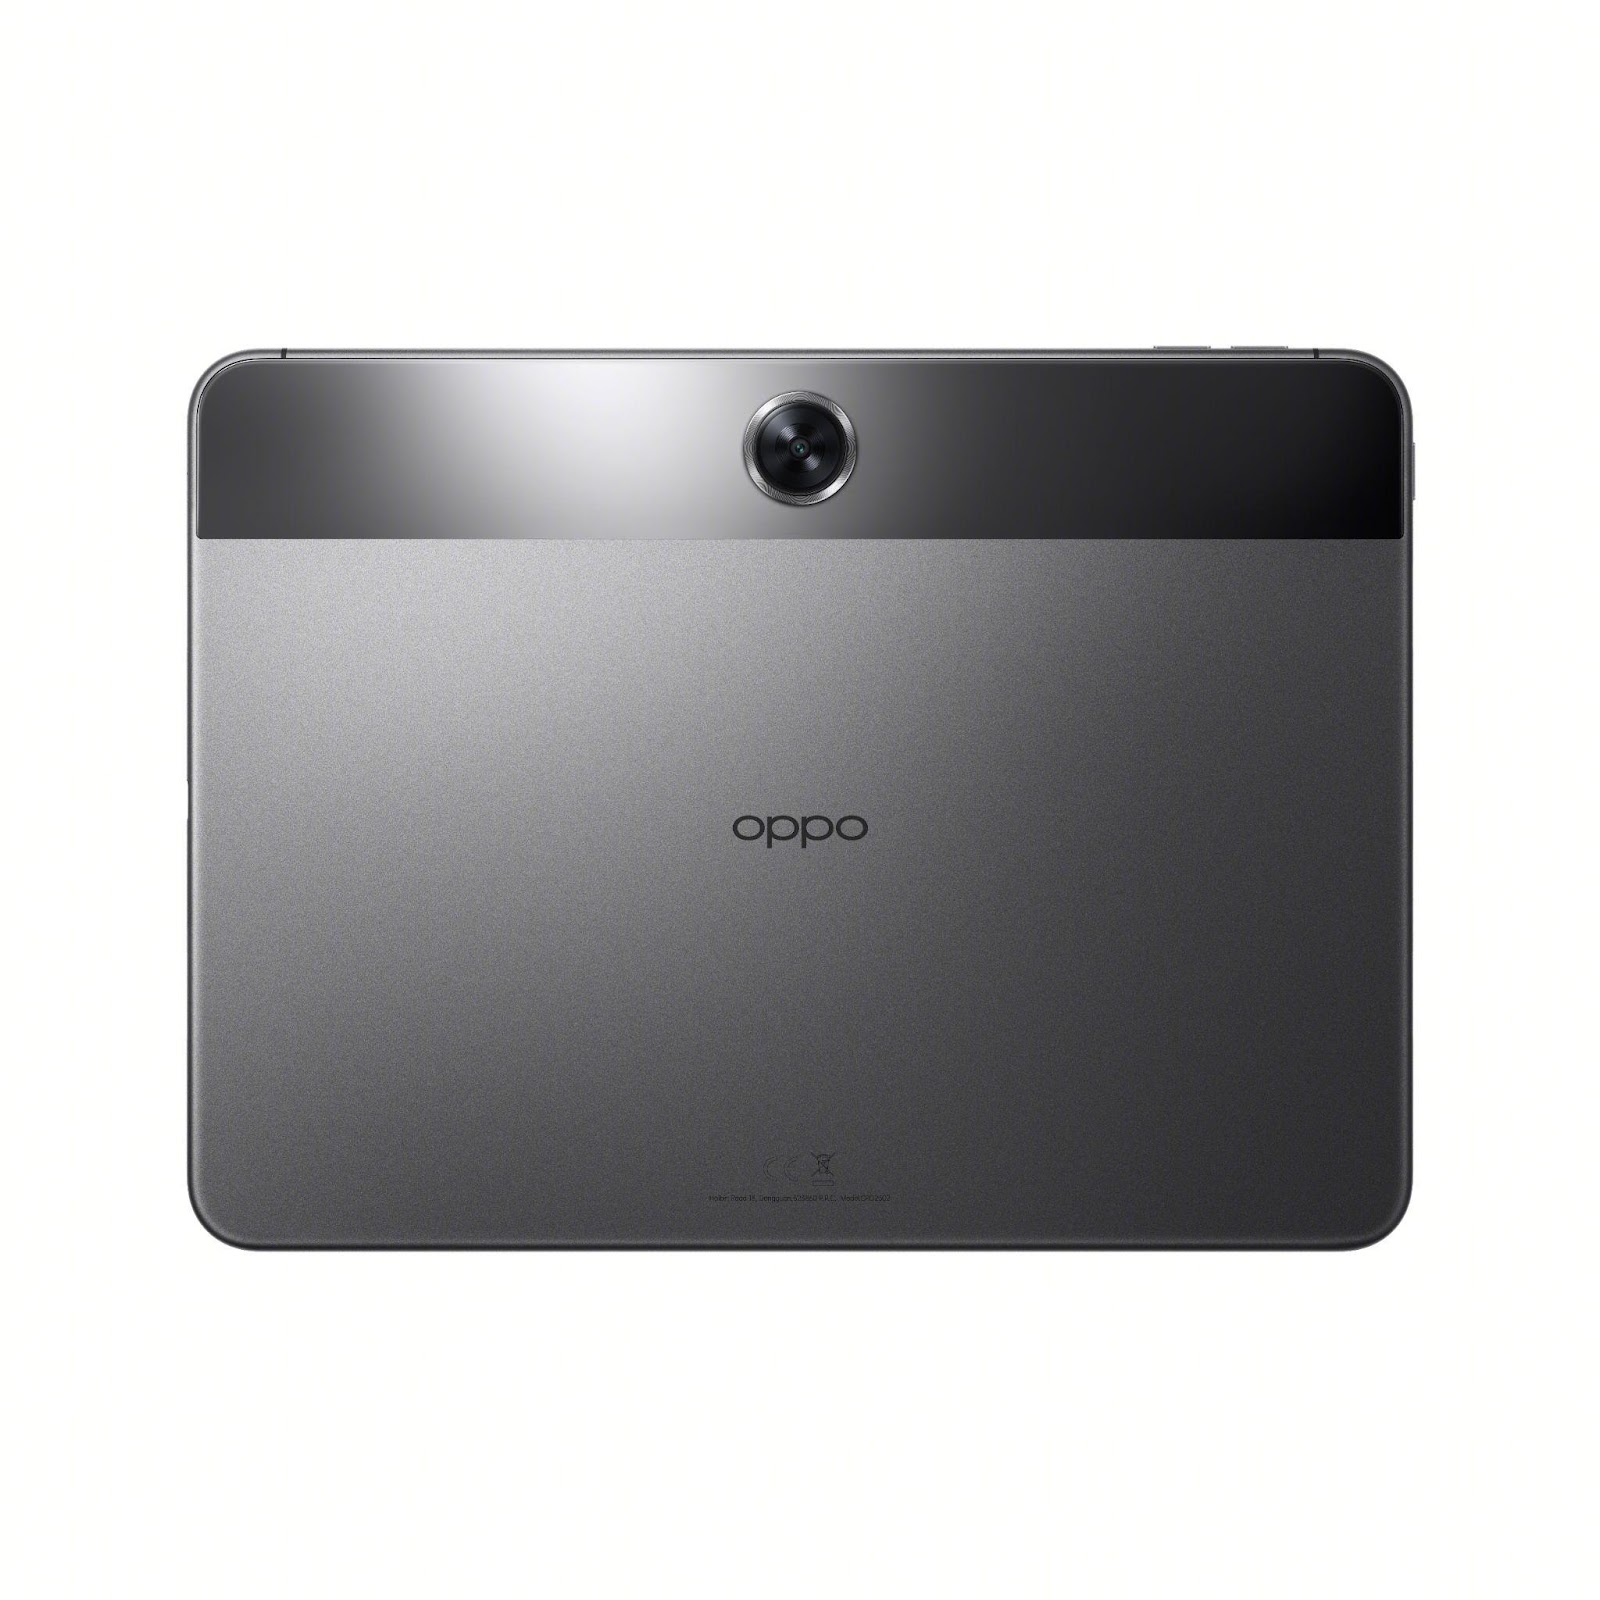 The OPPO Pad Neo is the tablet that checks the boxes for your daily needs